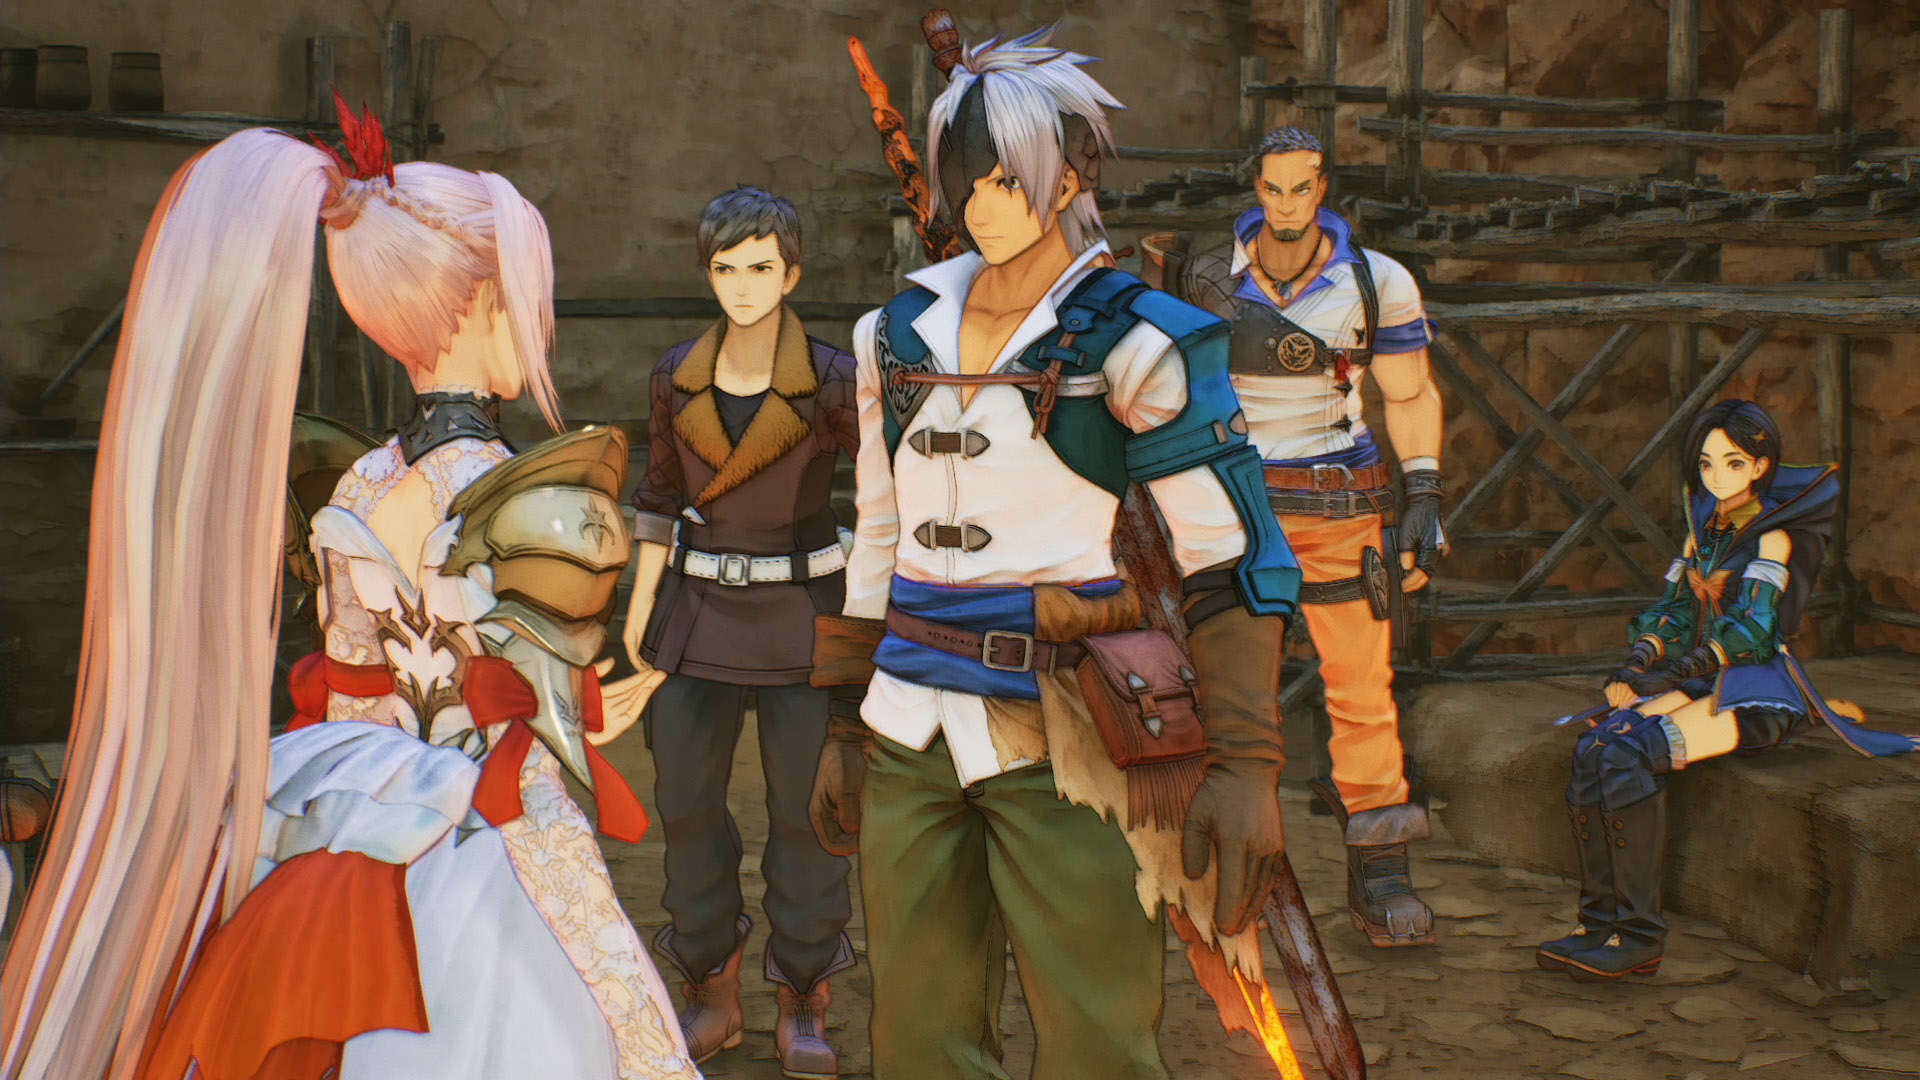 tales of arise switch